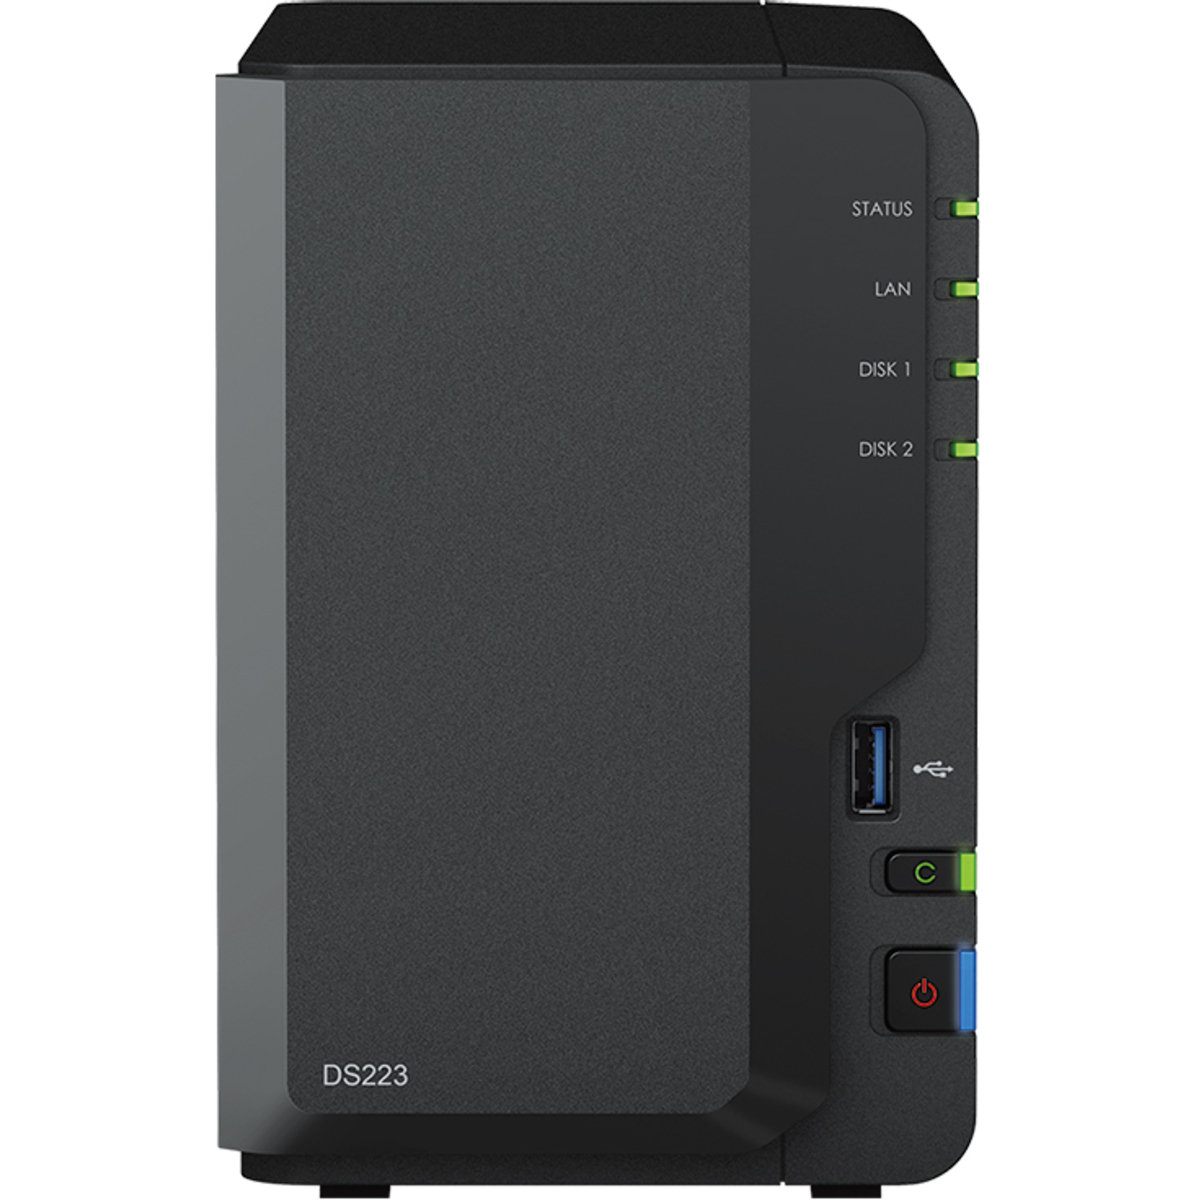 buy Synology DiskStation DS223 8tb Desktop NAS - Network Attached Storage Device 2x4000gb Toshiba MN Series MN08ADA400E 3.5 7200rpm SATA 6Gb/s HDD NAS Class Drives Installed - Burn-In Tested - ON SALE - nas headquarters buy network attached storage server device das new raid-5 free shipping simply usa DiskStation DS223